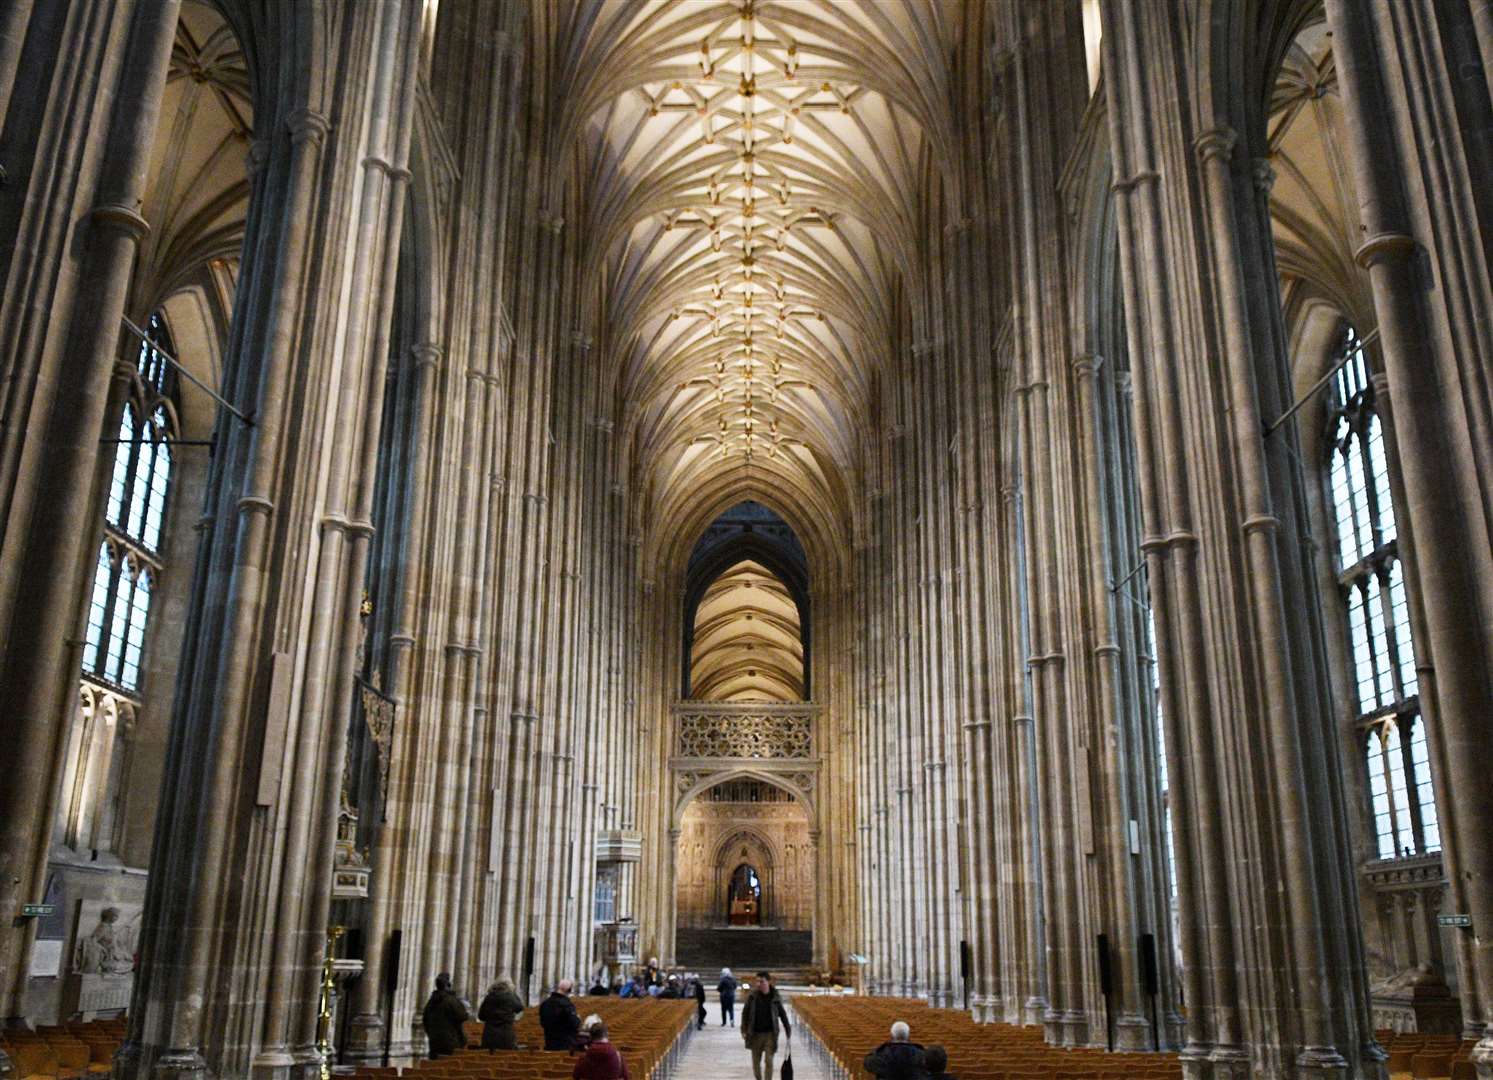 Officials say the Cathedral costs nearly £30,000 each day to keep open. Picture: Barry Goodwin